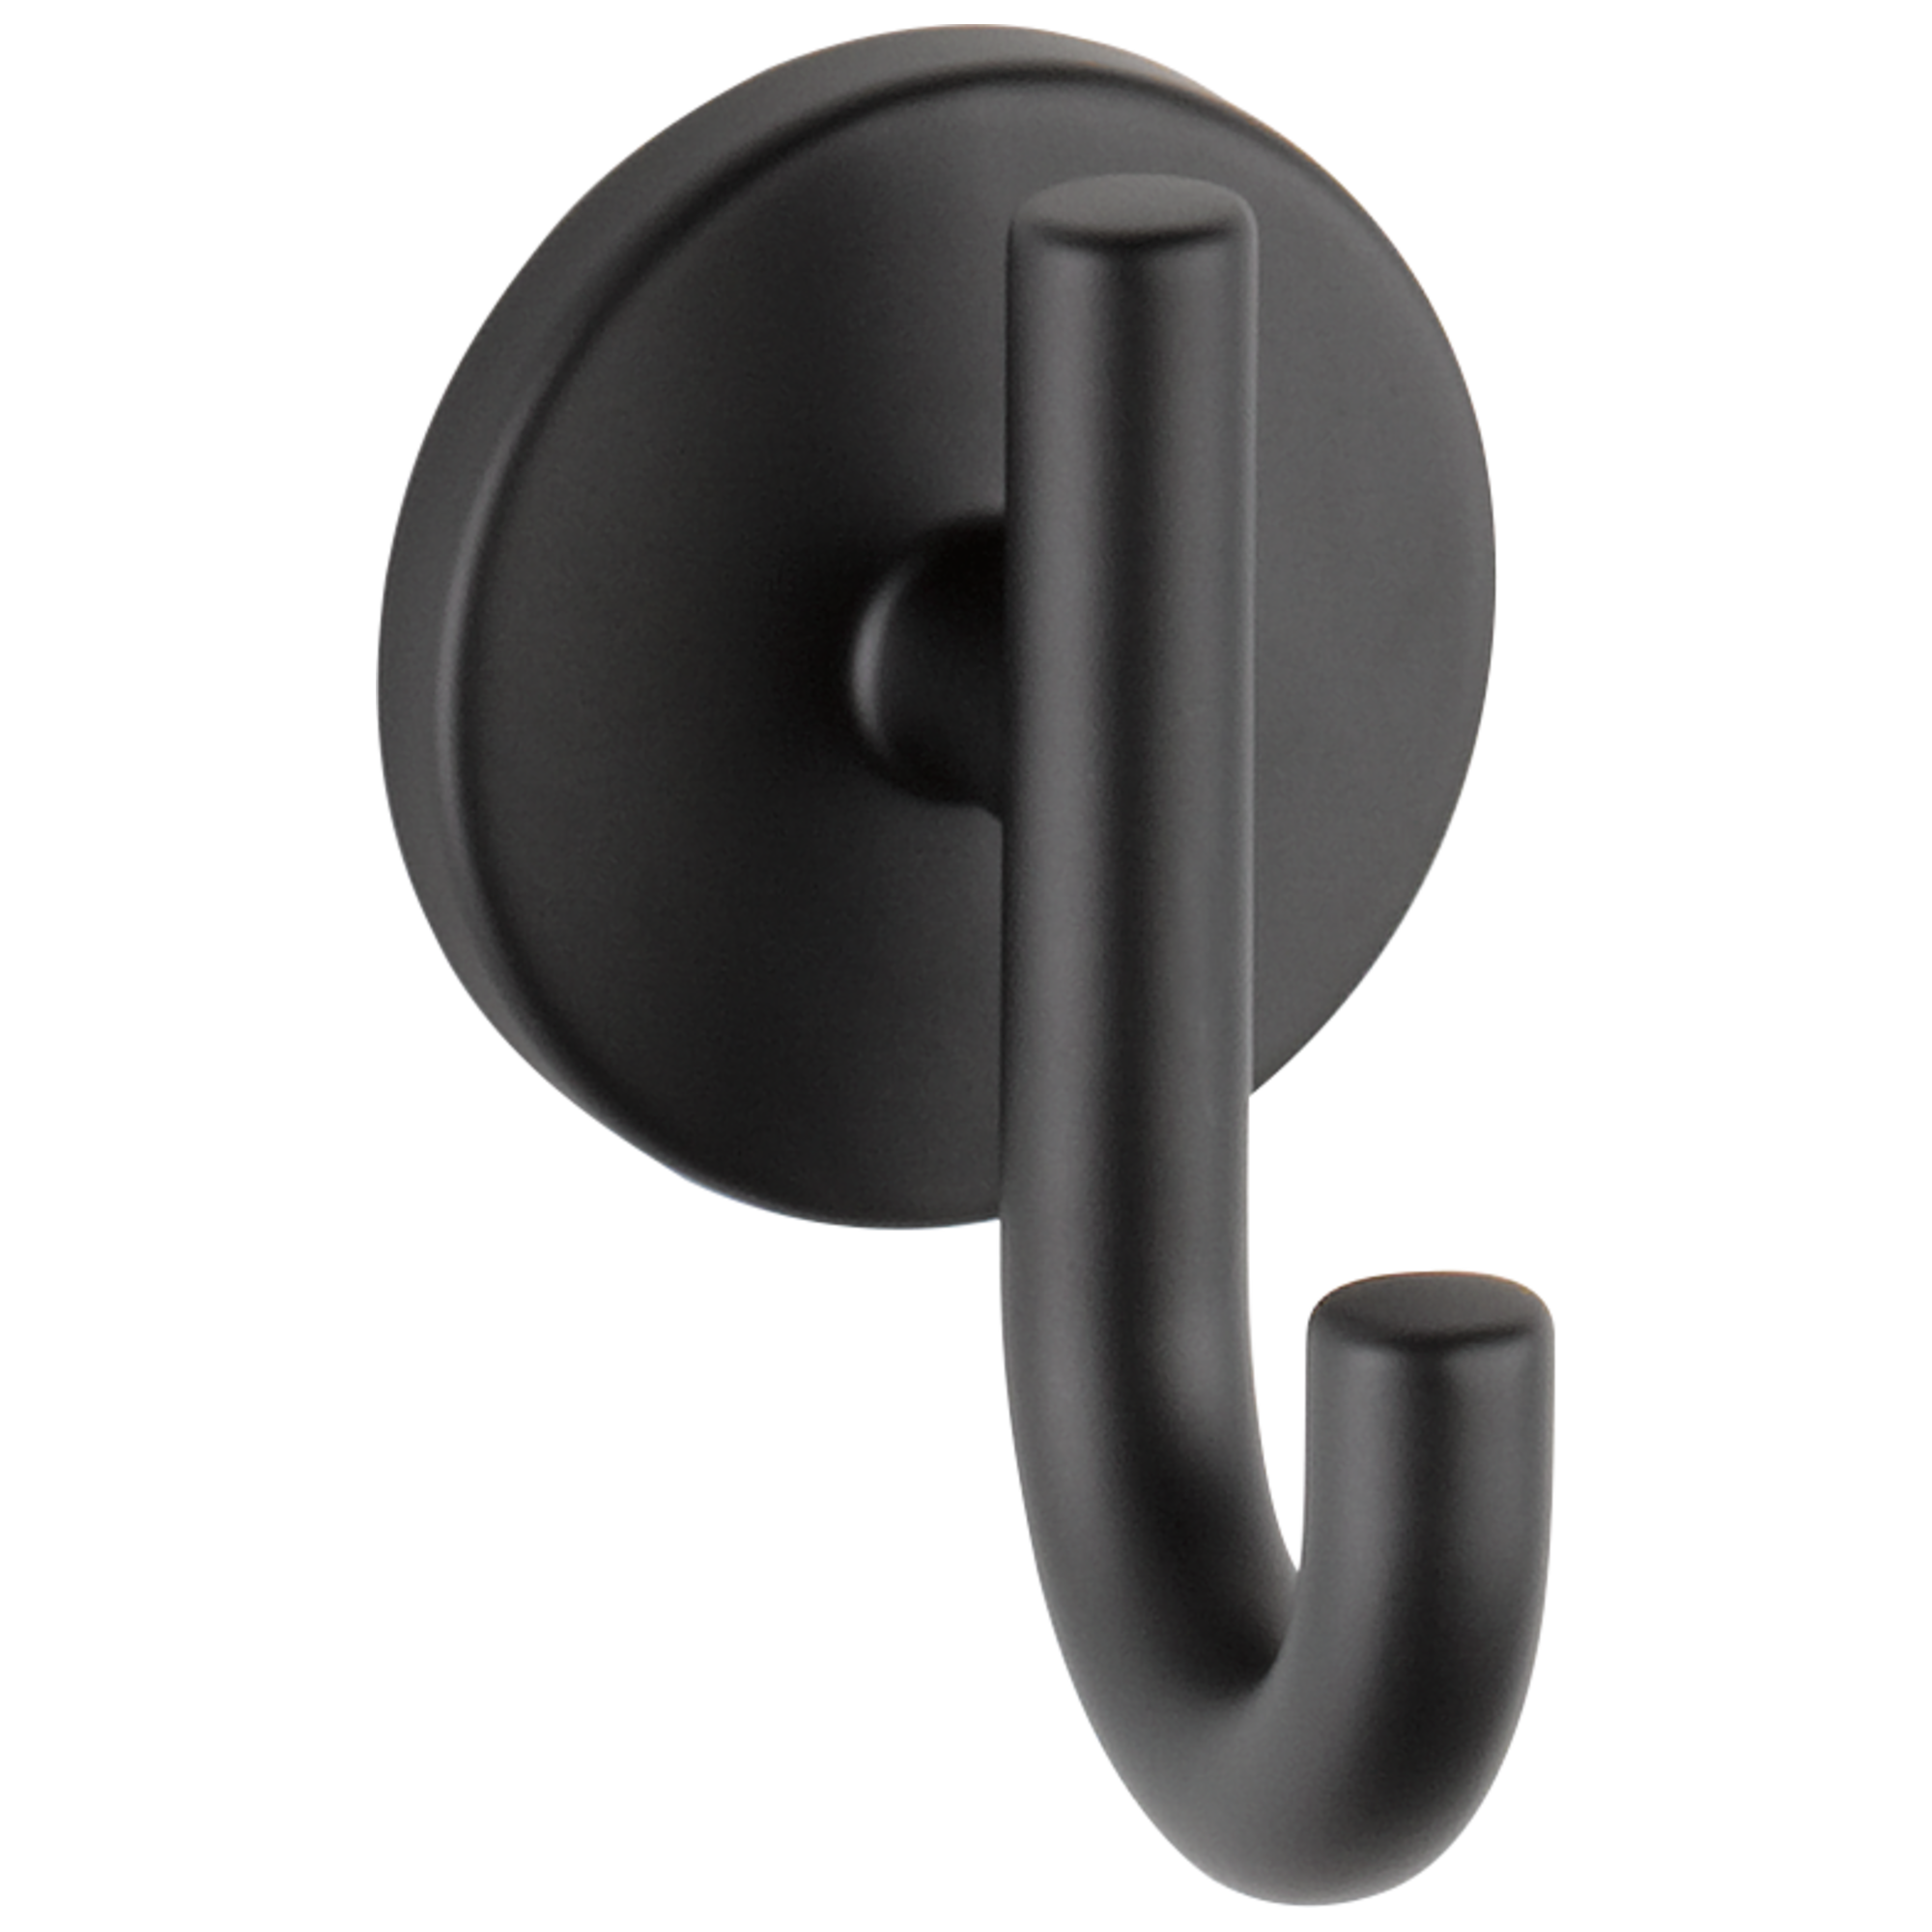 Delta 75935 Trinsic Wall Mounted Robe Hook